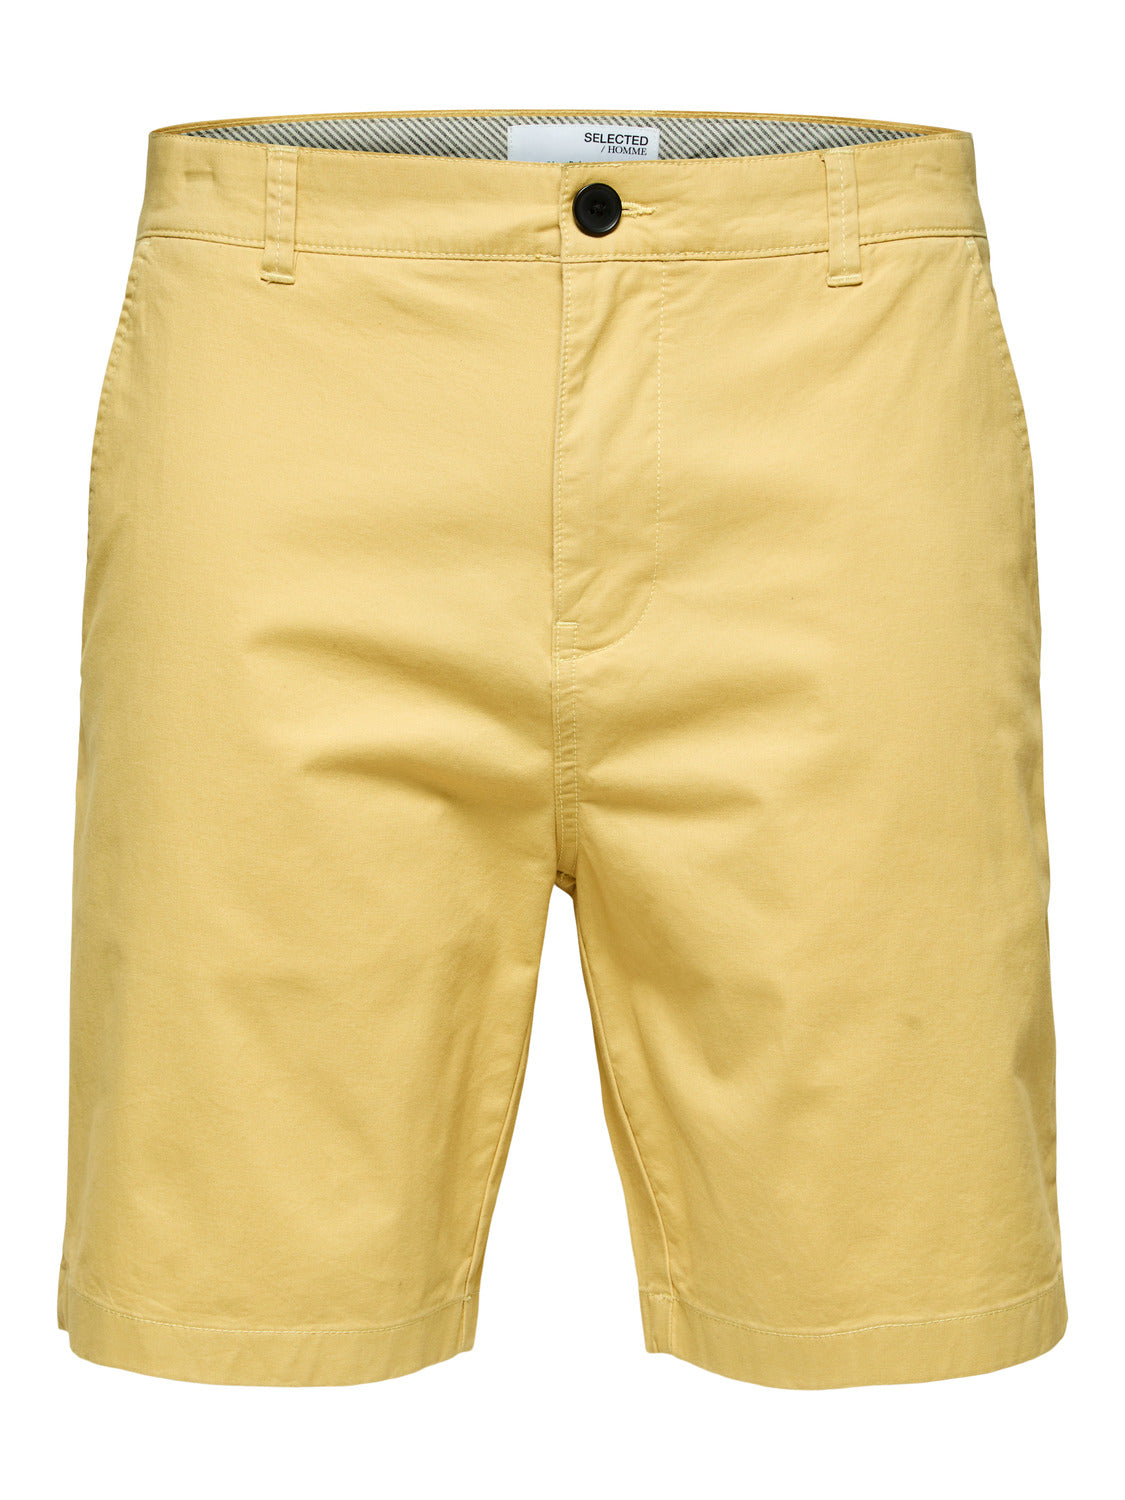 SELECTED HOMME - COMFORT-HOMME Shorts - Cocoon